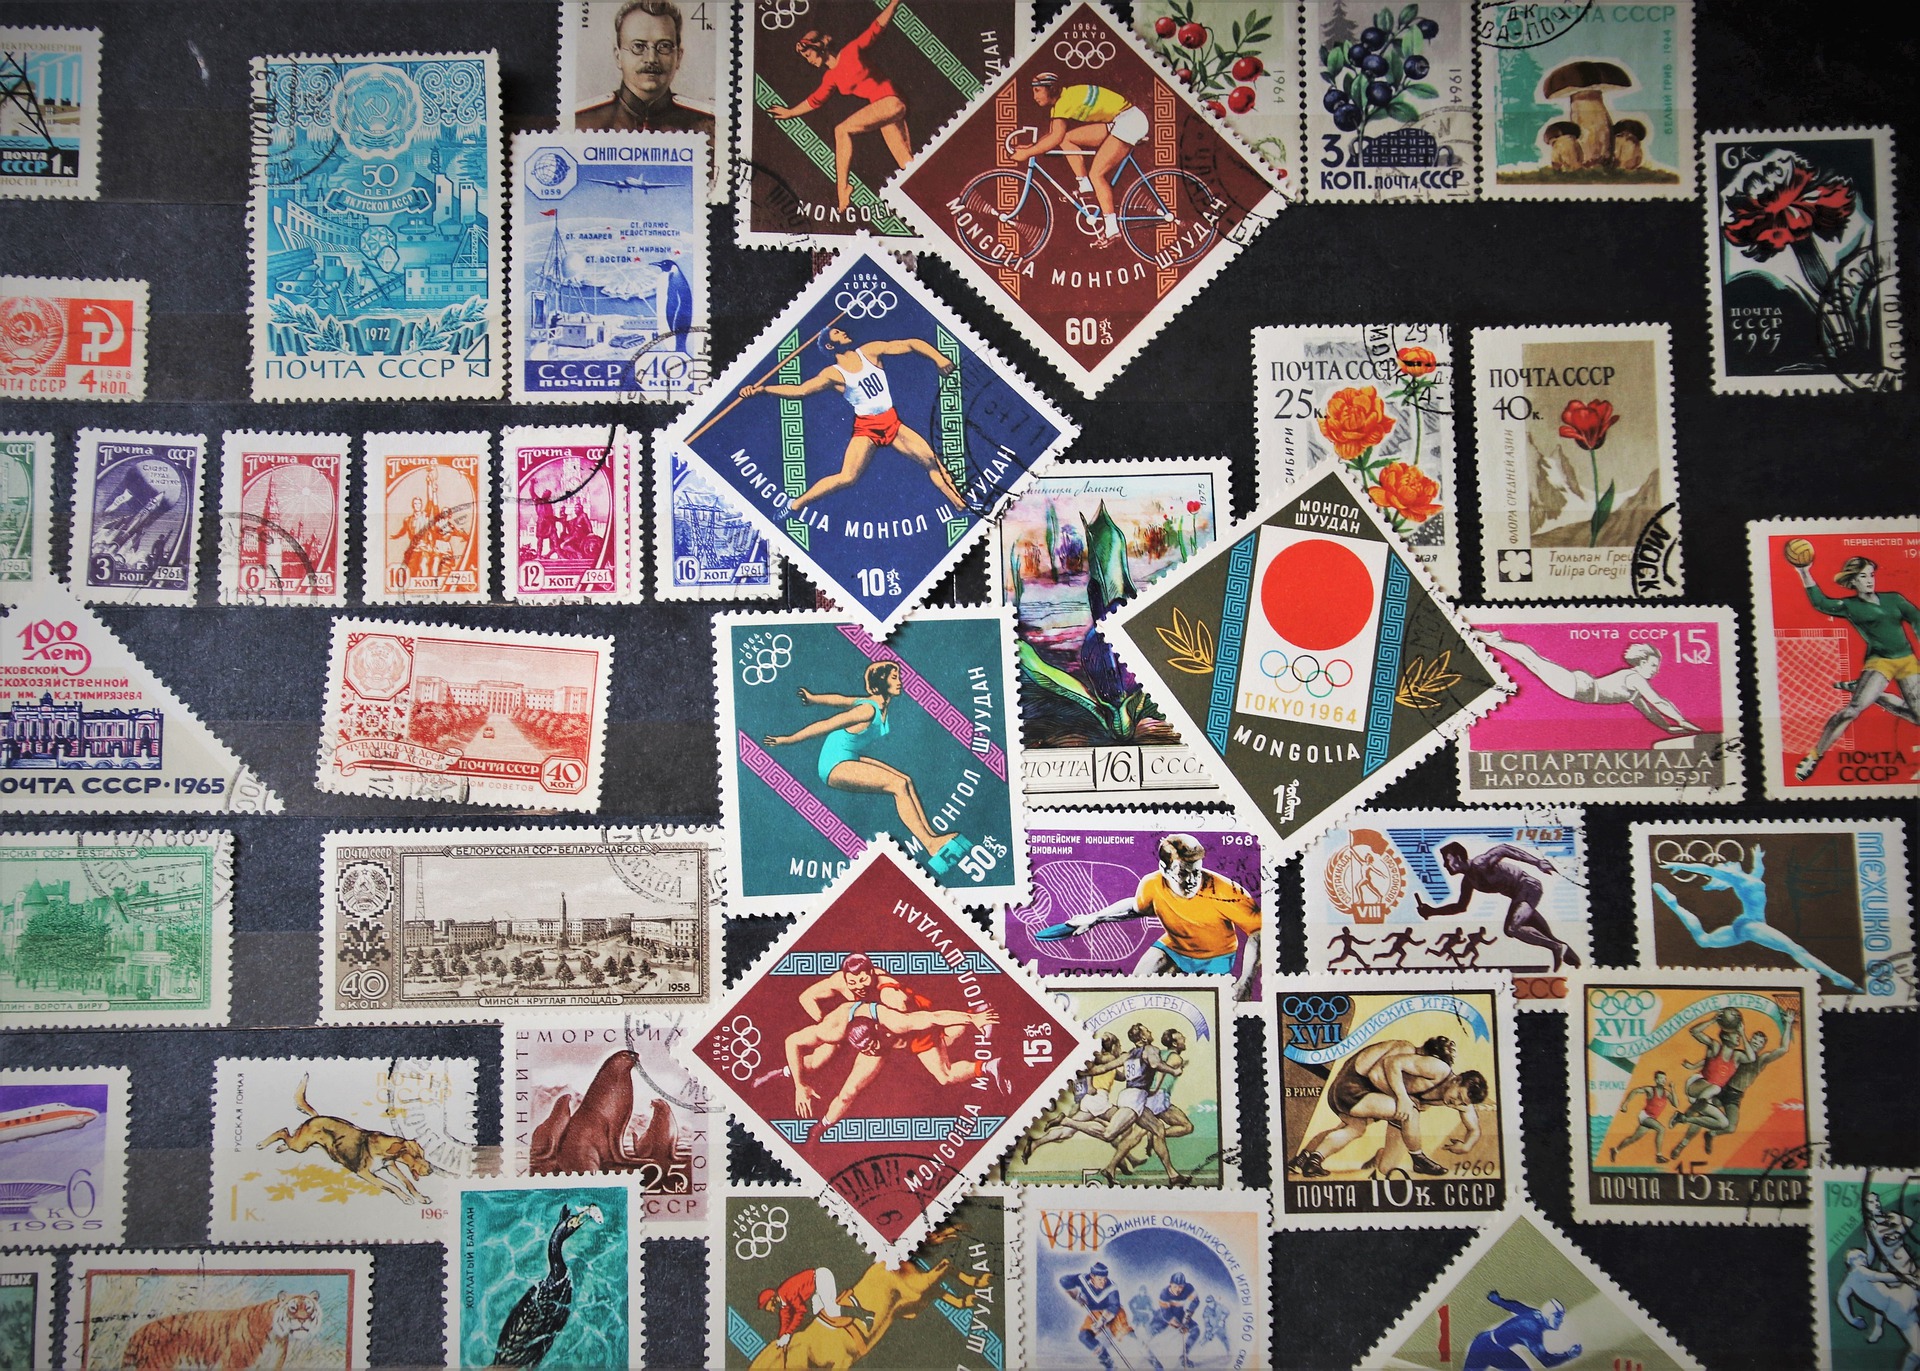 Stamp Collection: An affordable hobby – Part 1